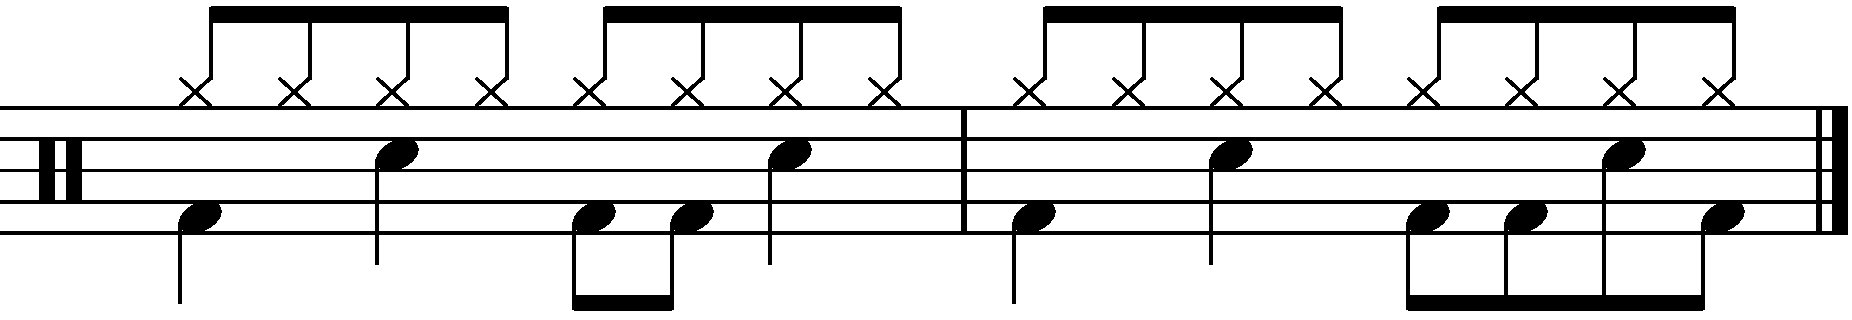 2 Bar Grooves - Example 3b